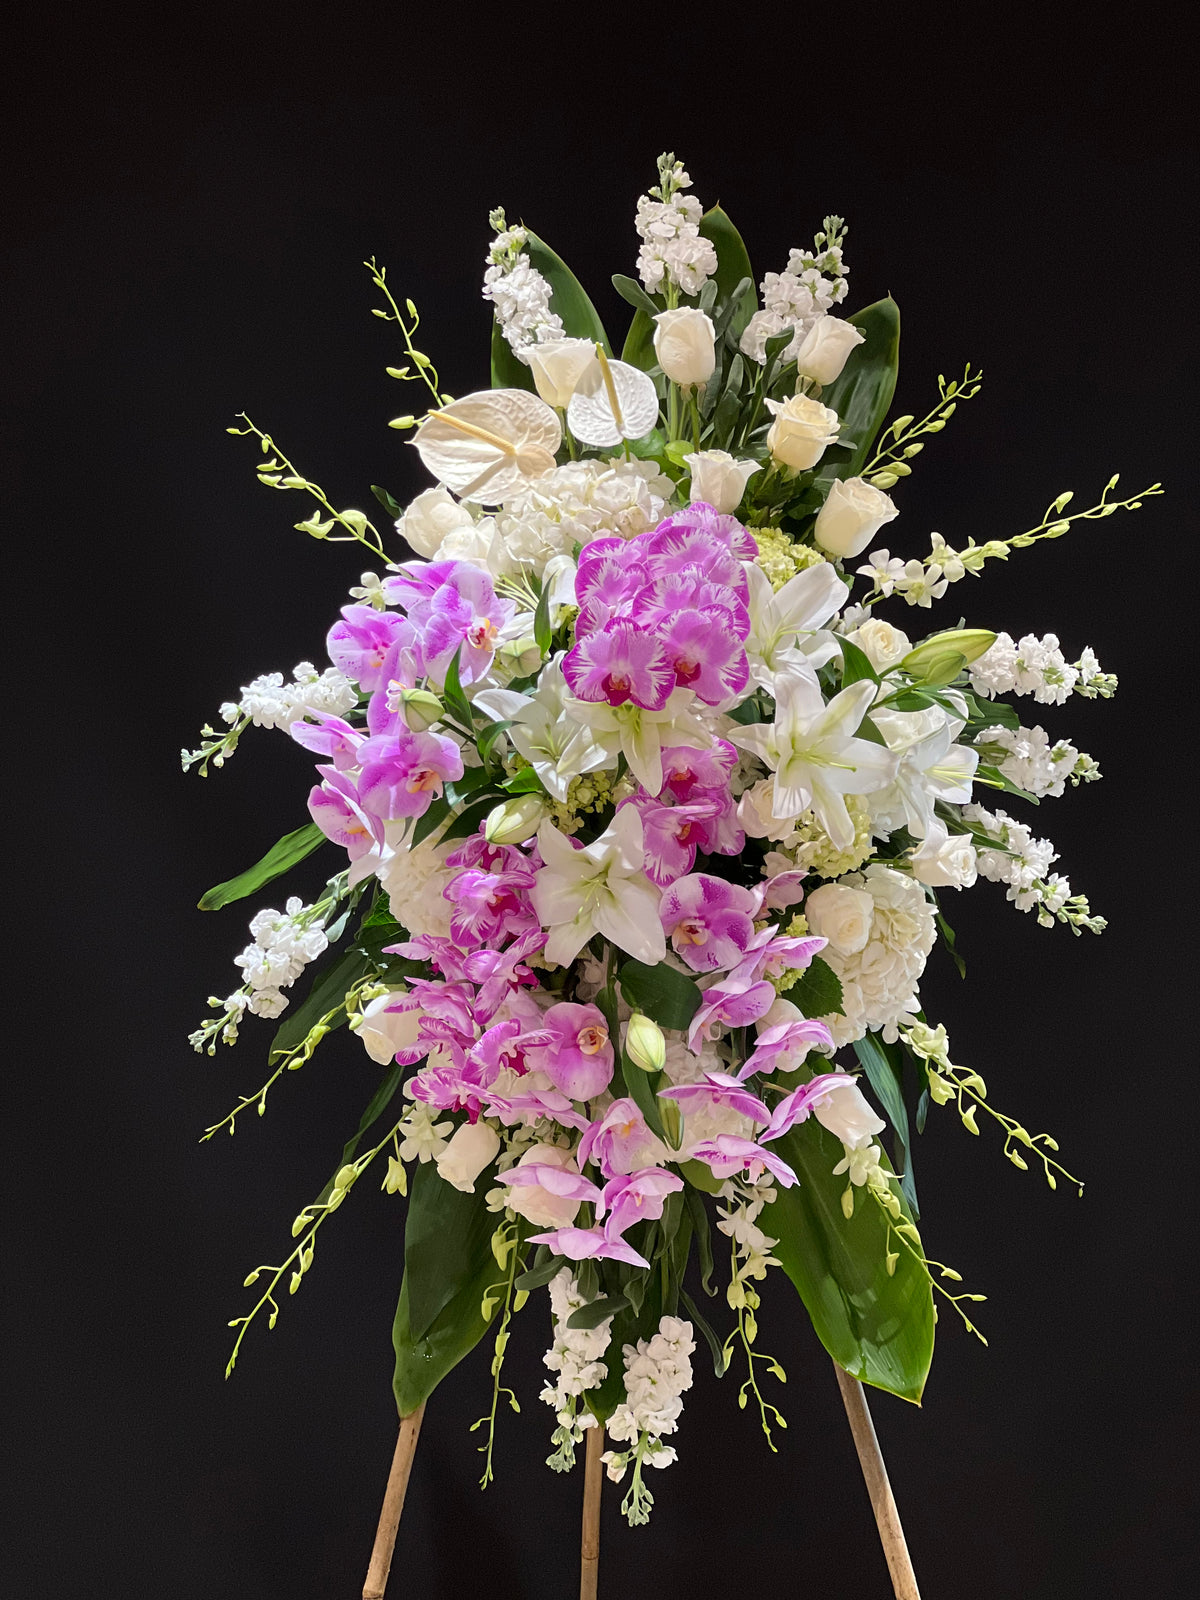 Floral standing spray with orchids, roses, anthuriums, lilies, and hydrangeas, including purple phalaenopsis orchids - Sympathy Tribute by Yonge Florist